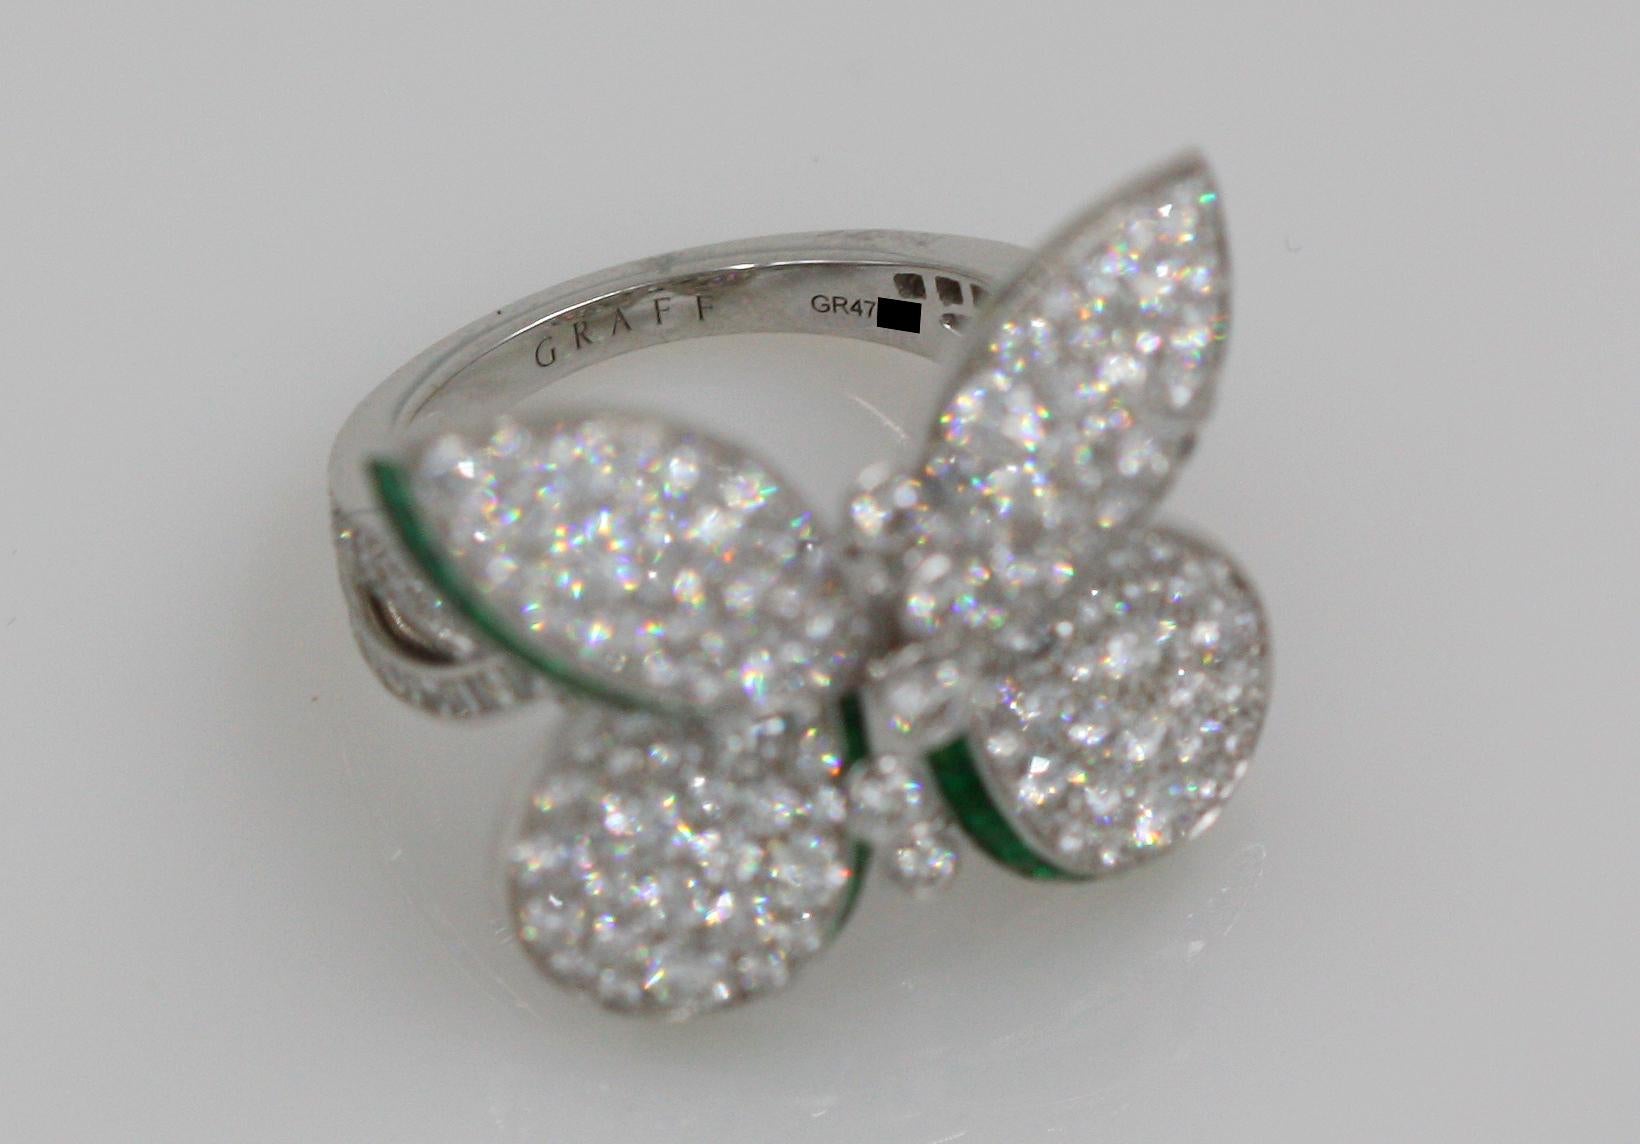 butterfly emerald ring